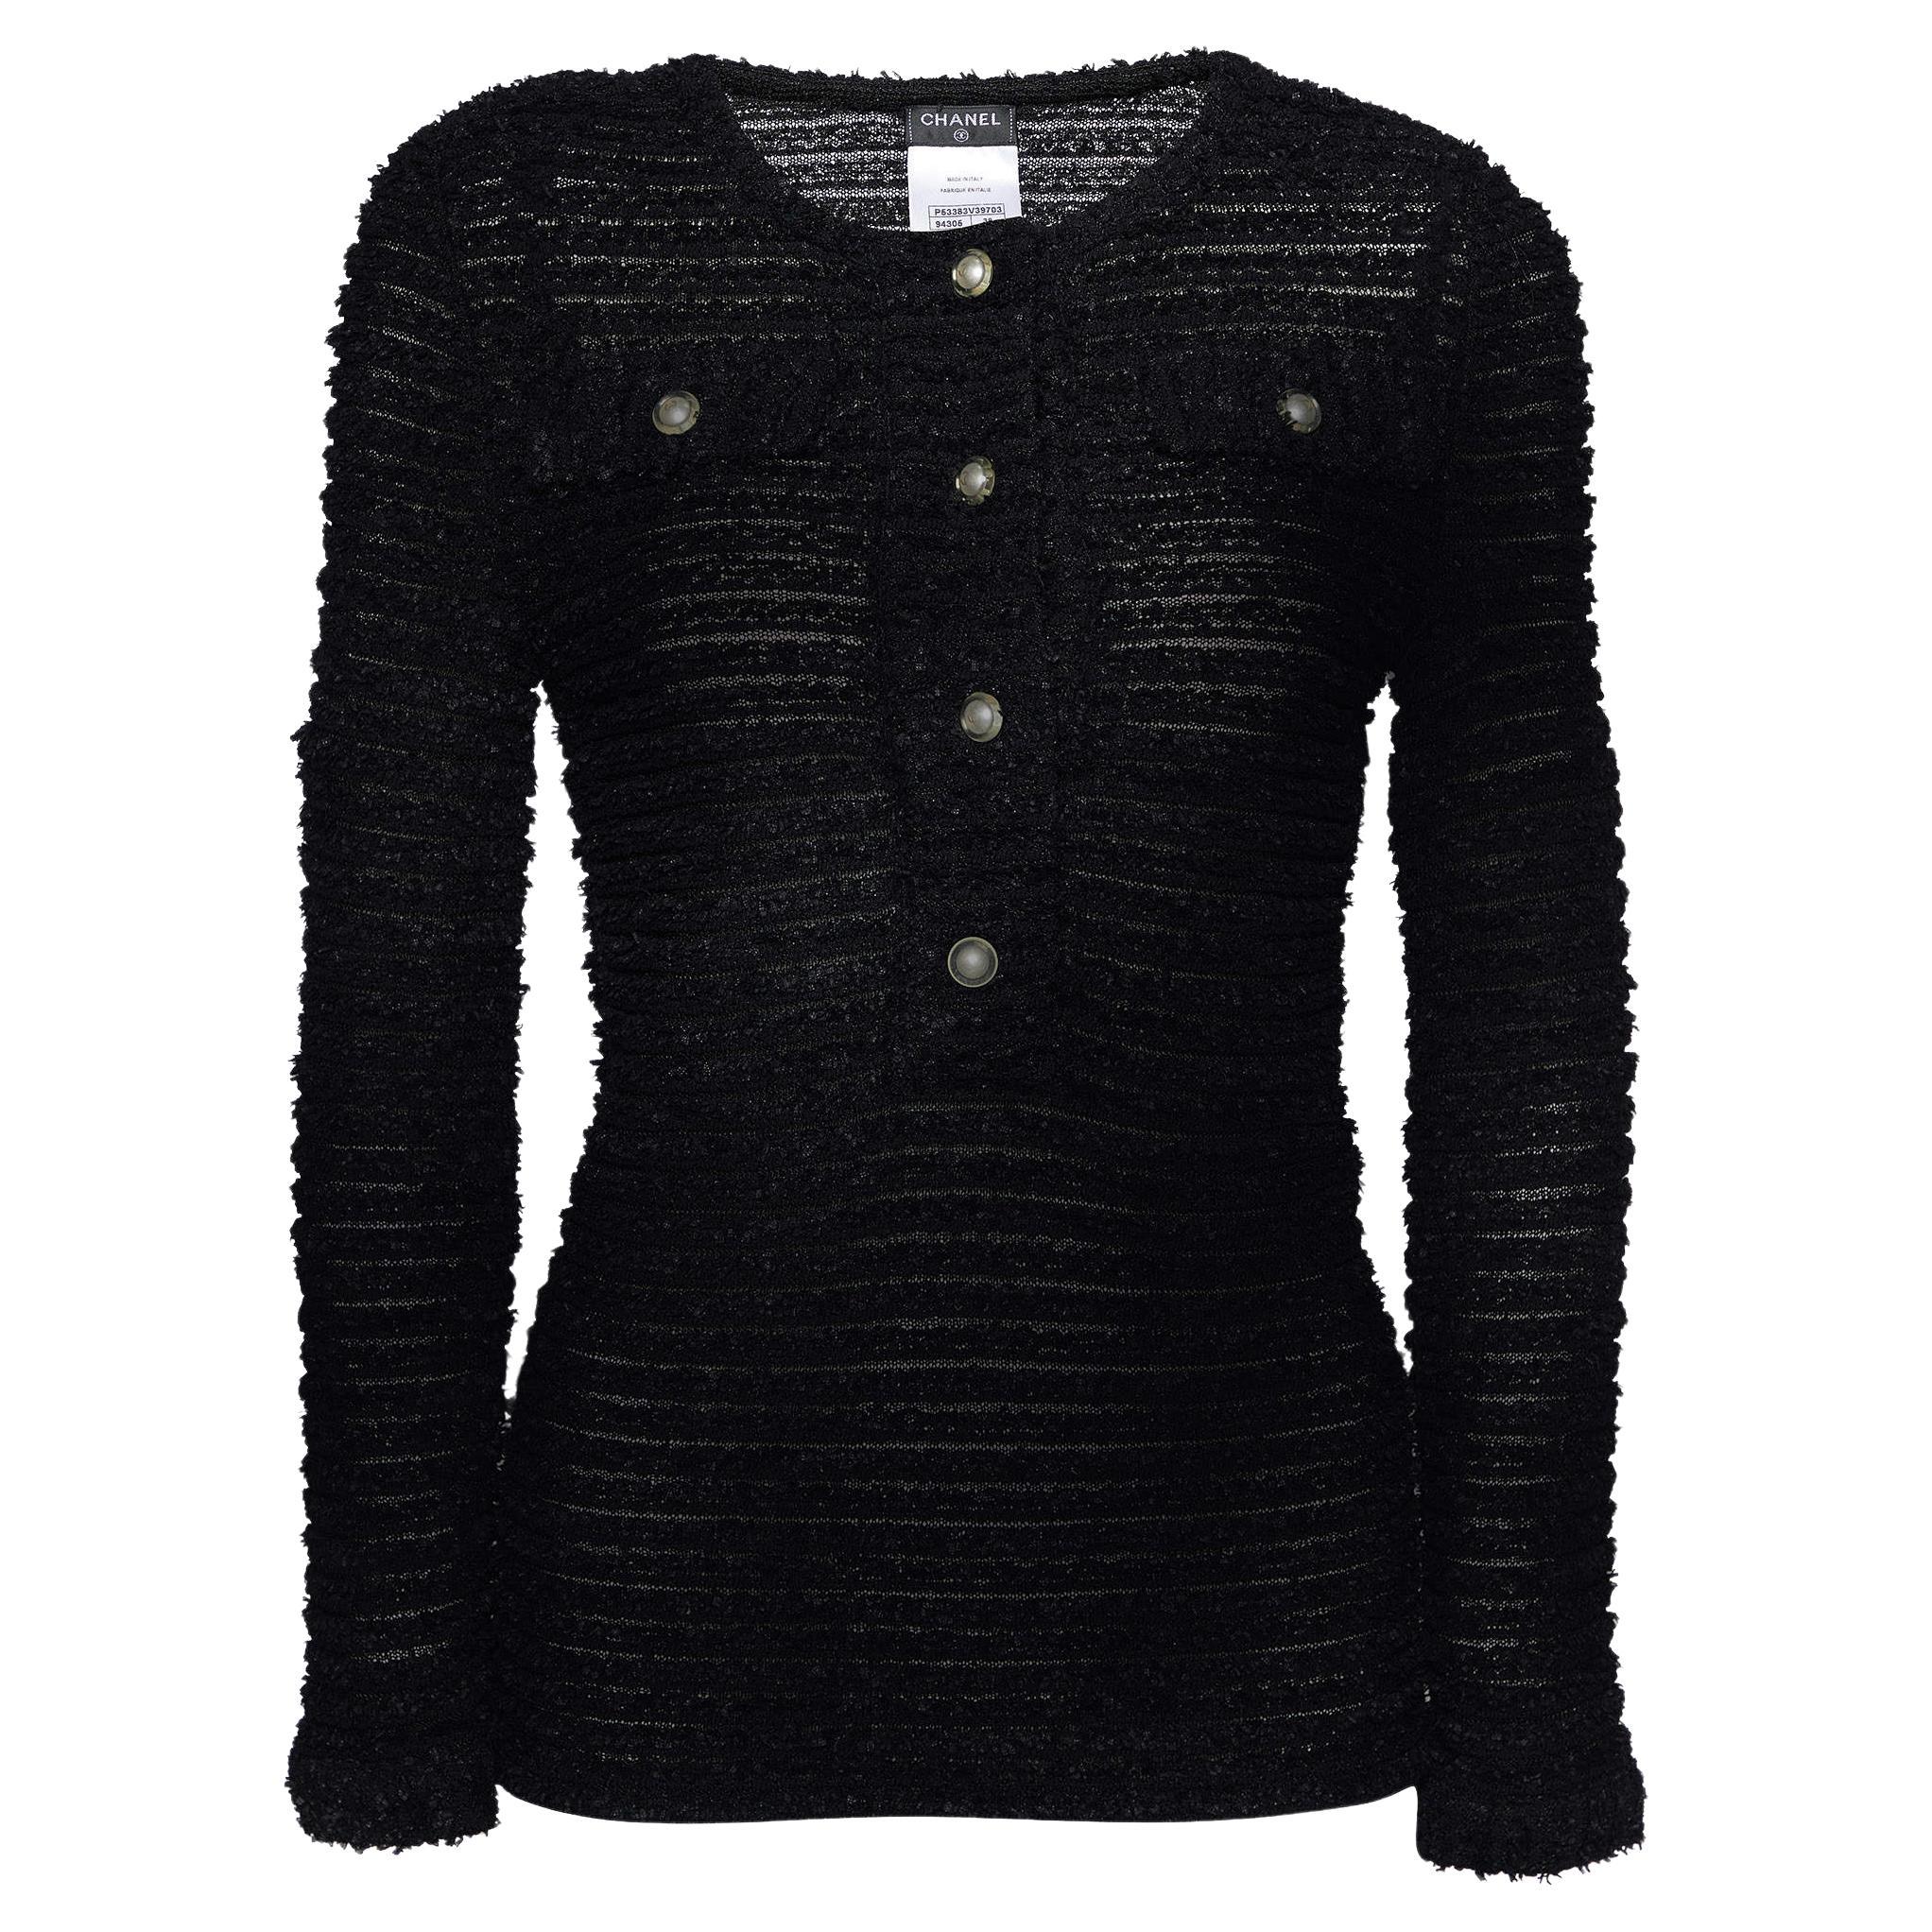 Chanel Black Sheer Knit Boucle Detail Top M